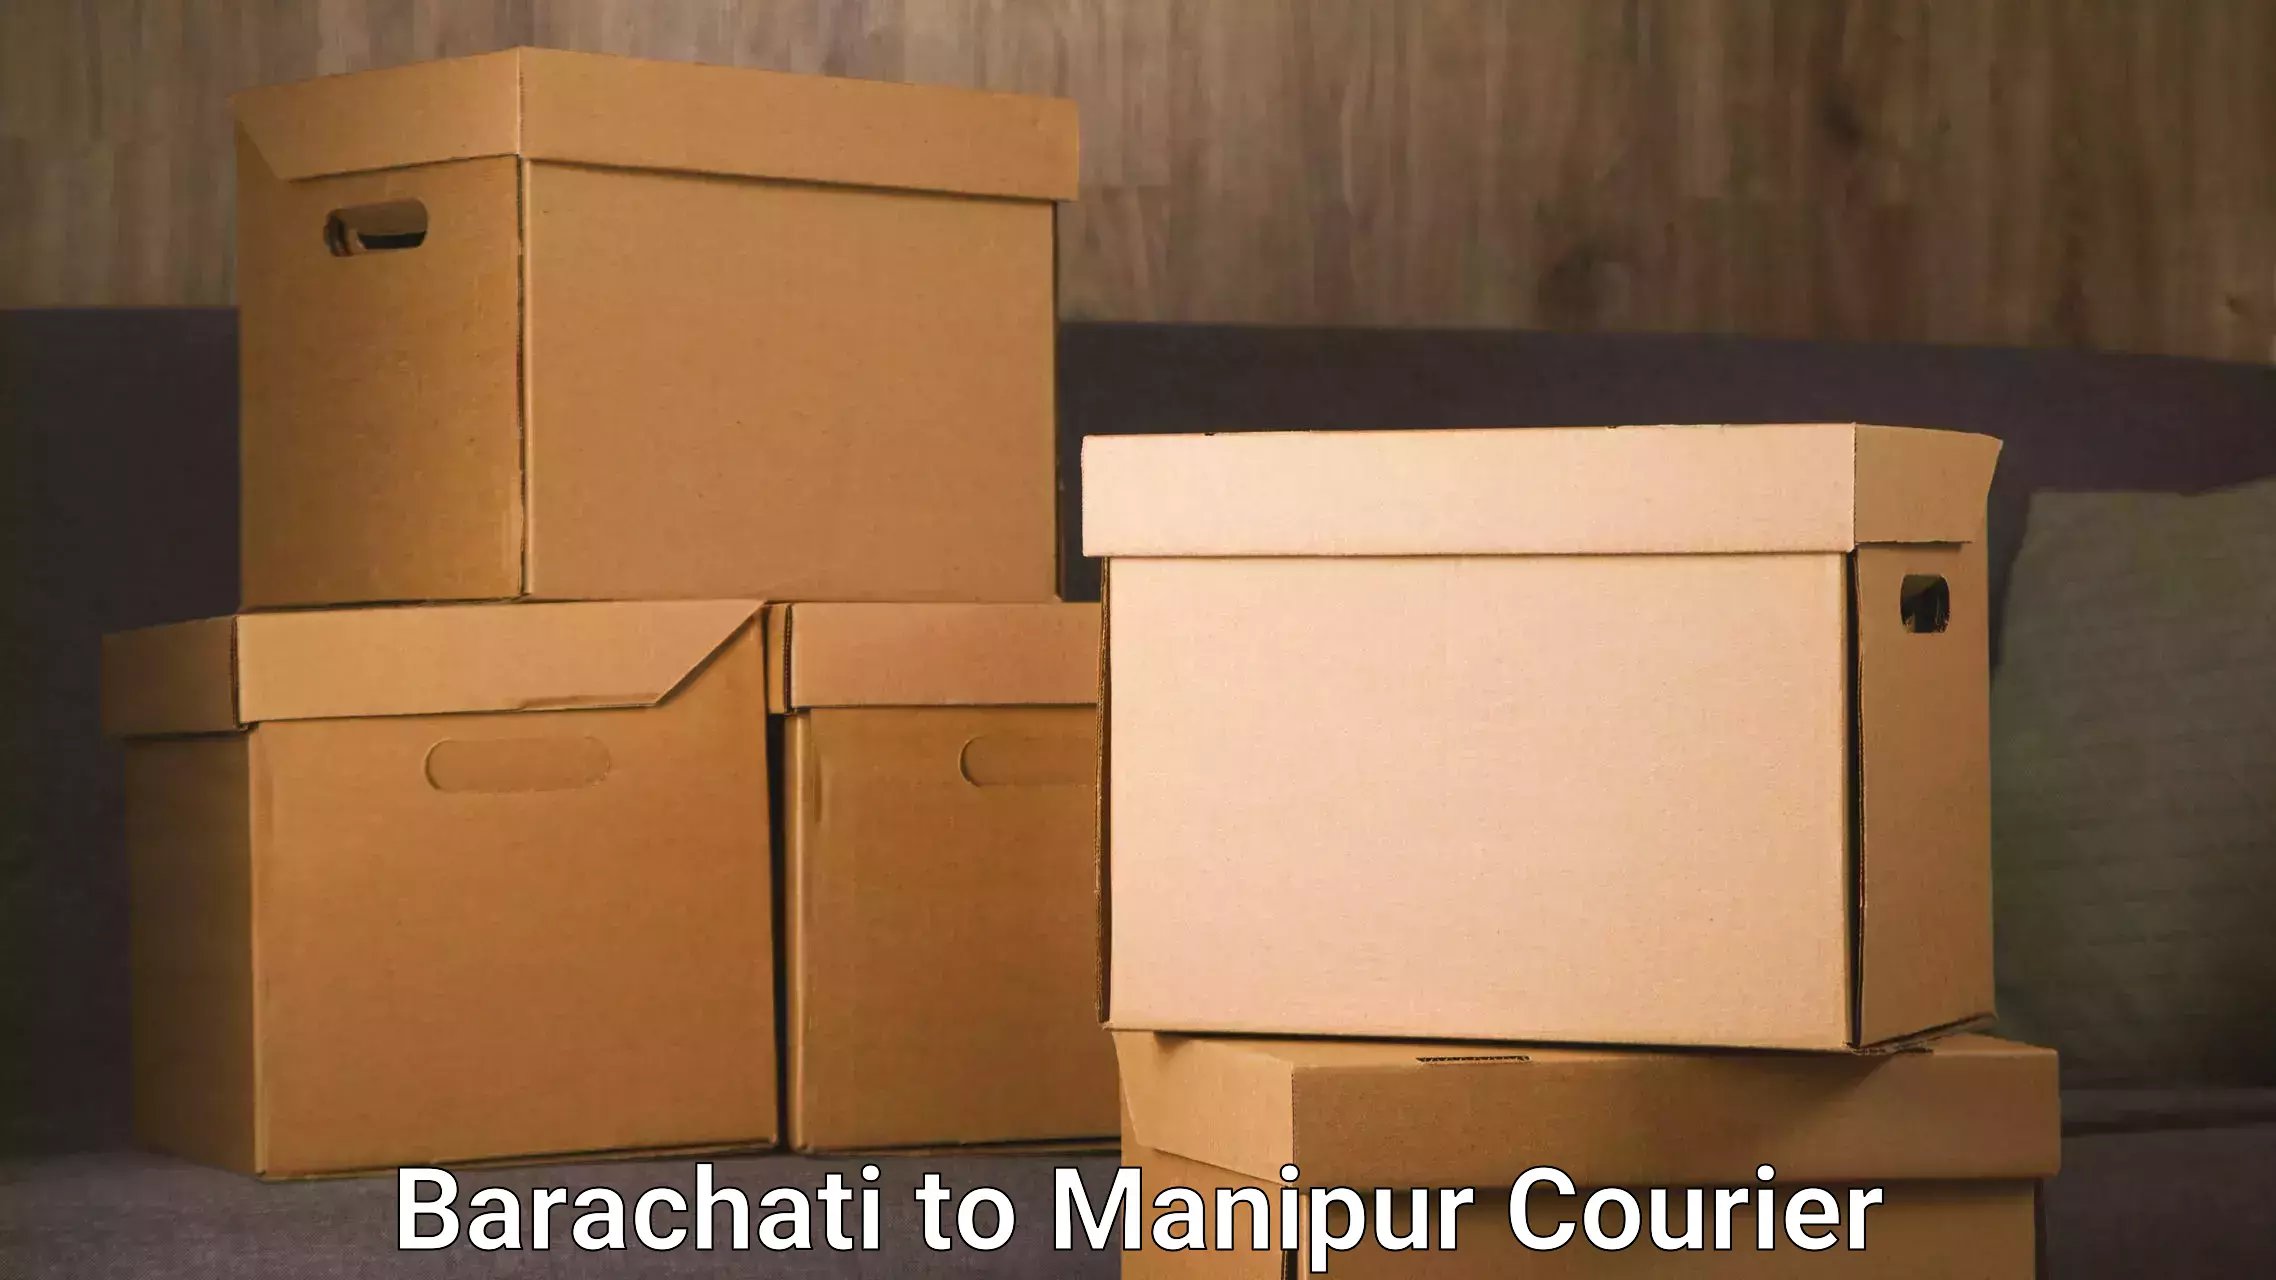 Trusted relocation experts Barachati to Manipur